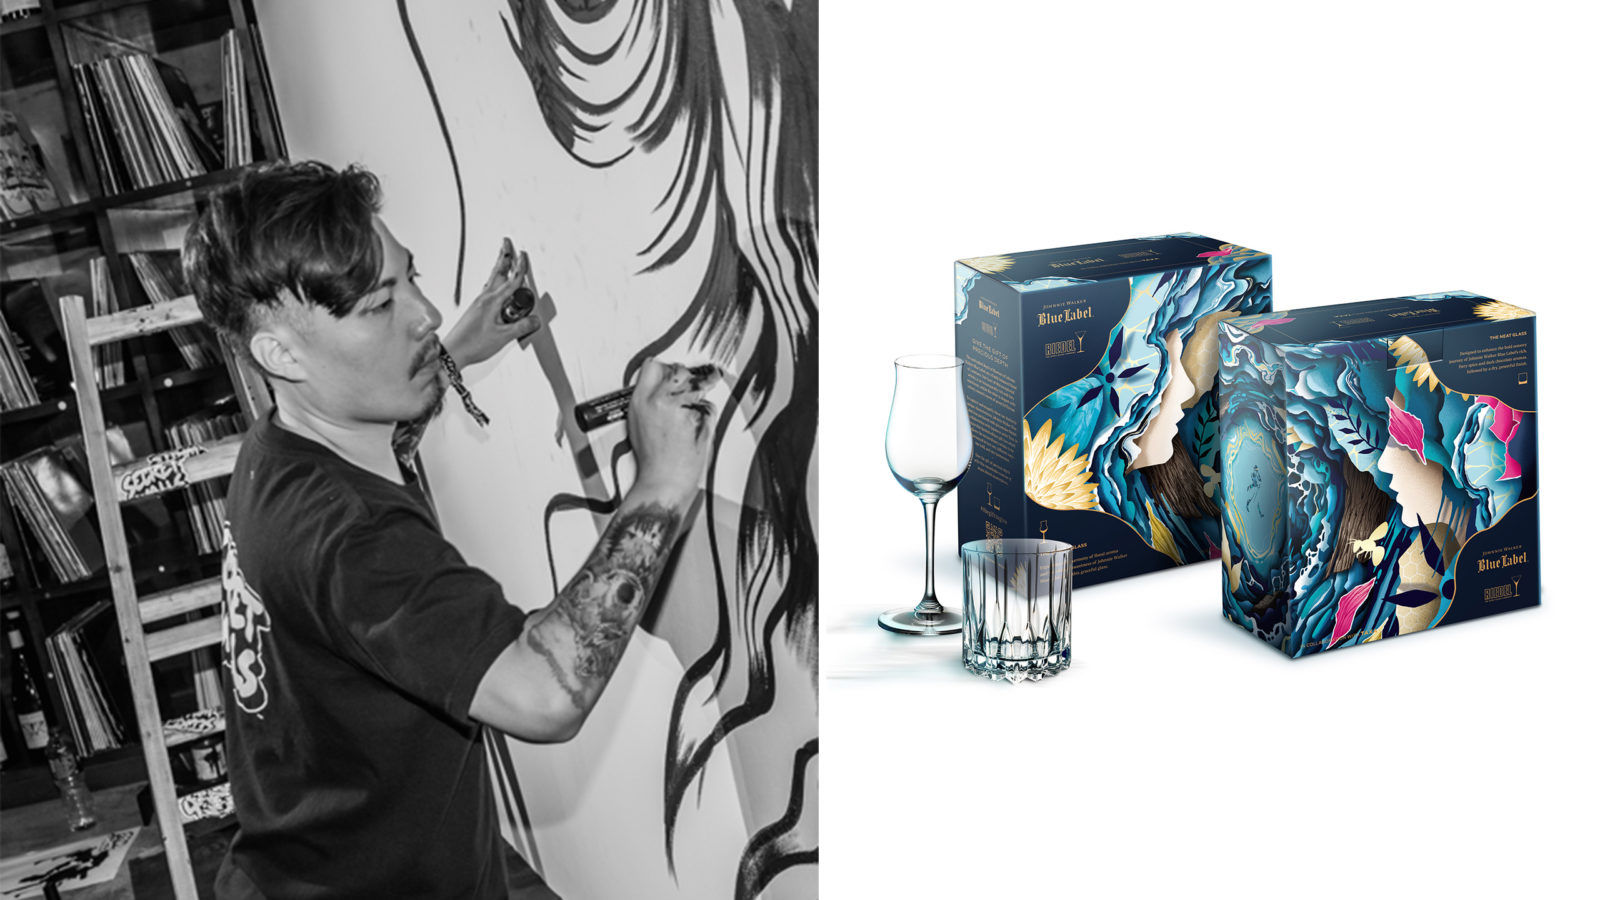 Hong Kong urban artist Taxa teams up with Johnnie Walker Blue Label and Riedel on limited-edition gift box